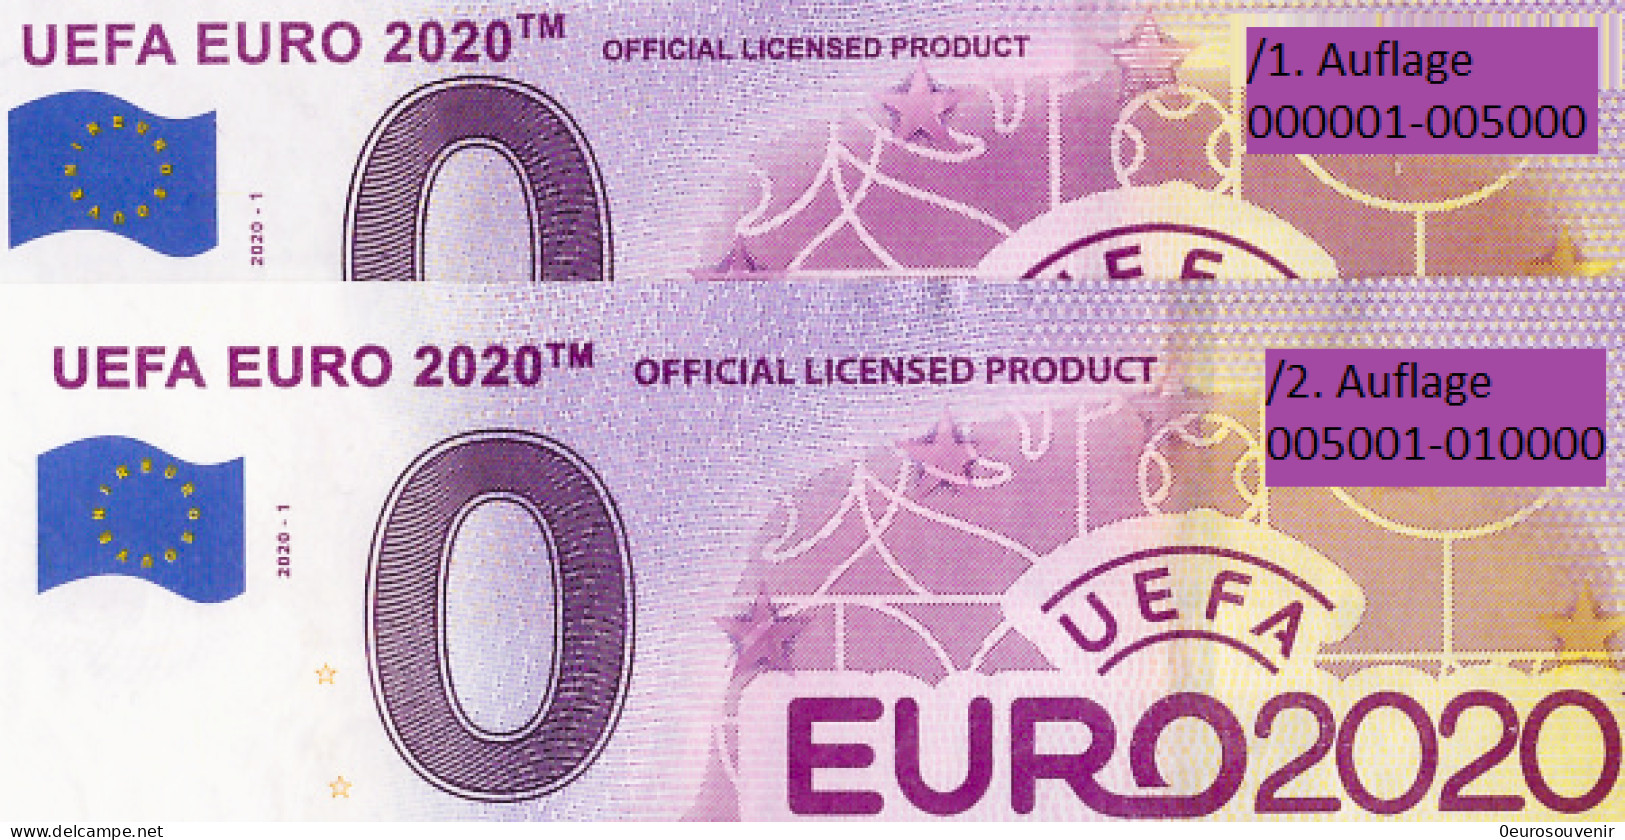 0-Euro XEKM 2020-1 /1 UEFA EURO 2020 - OFFICIAL LICENSED PRODUCT - Privatentwürfe